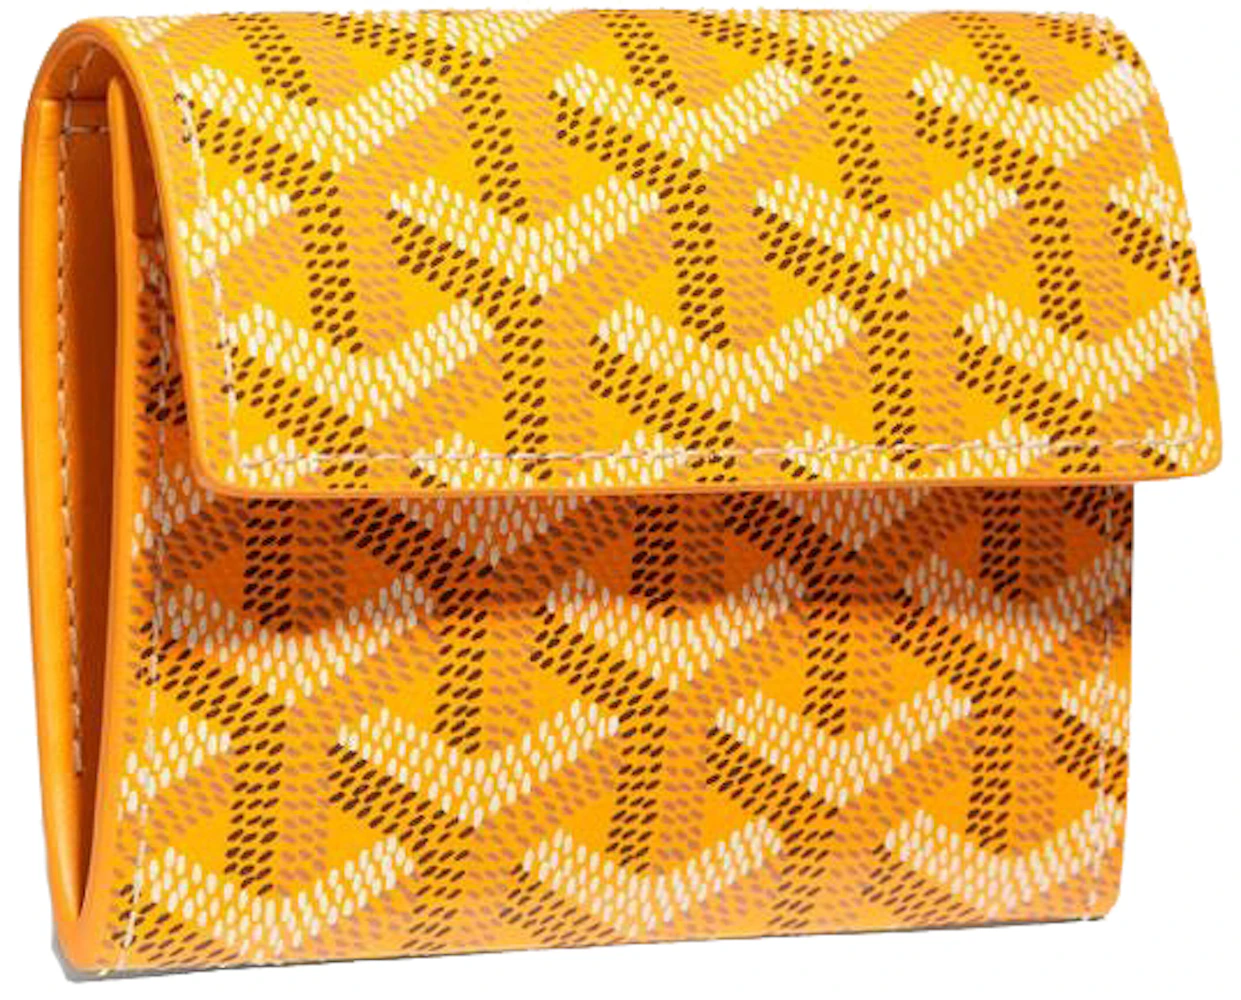 Goyard Marigny Wallet Yellow in Canvas/Calfskin Leather with